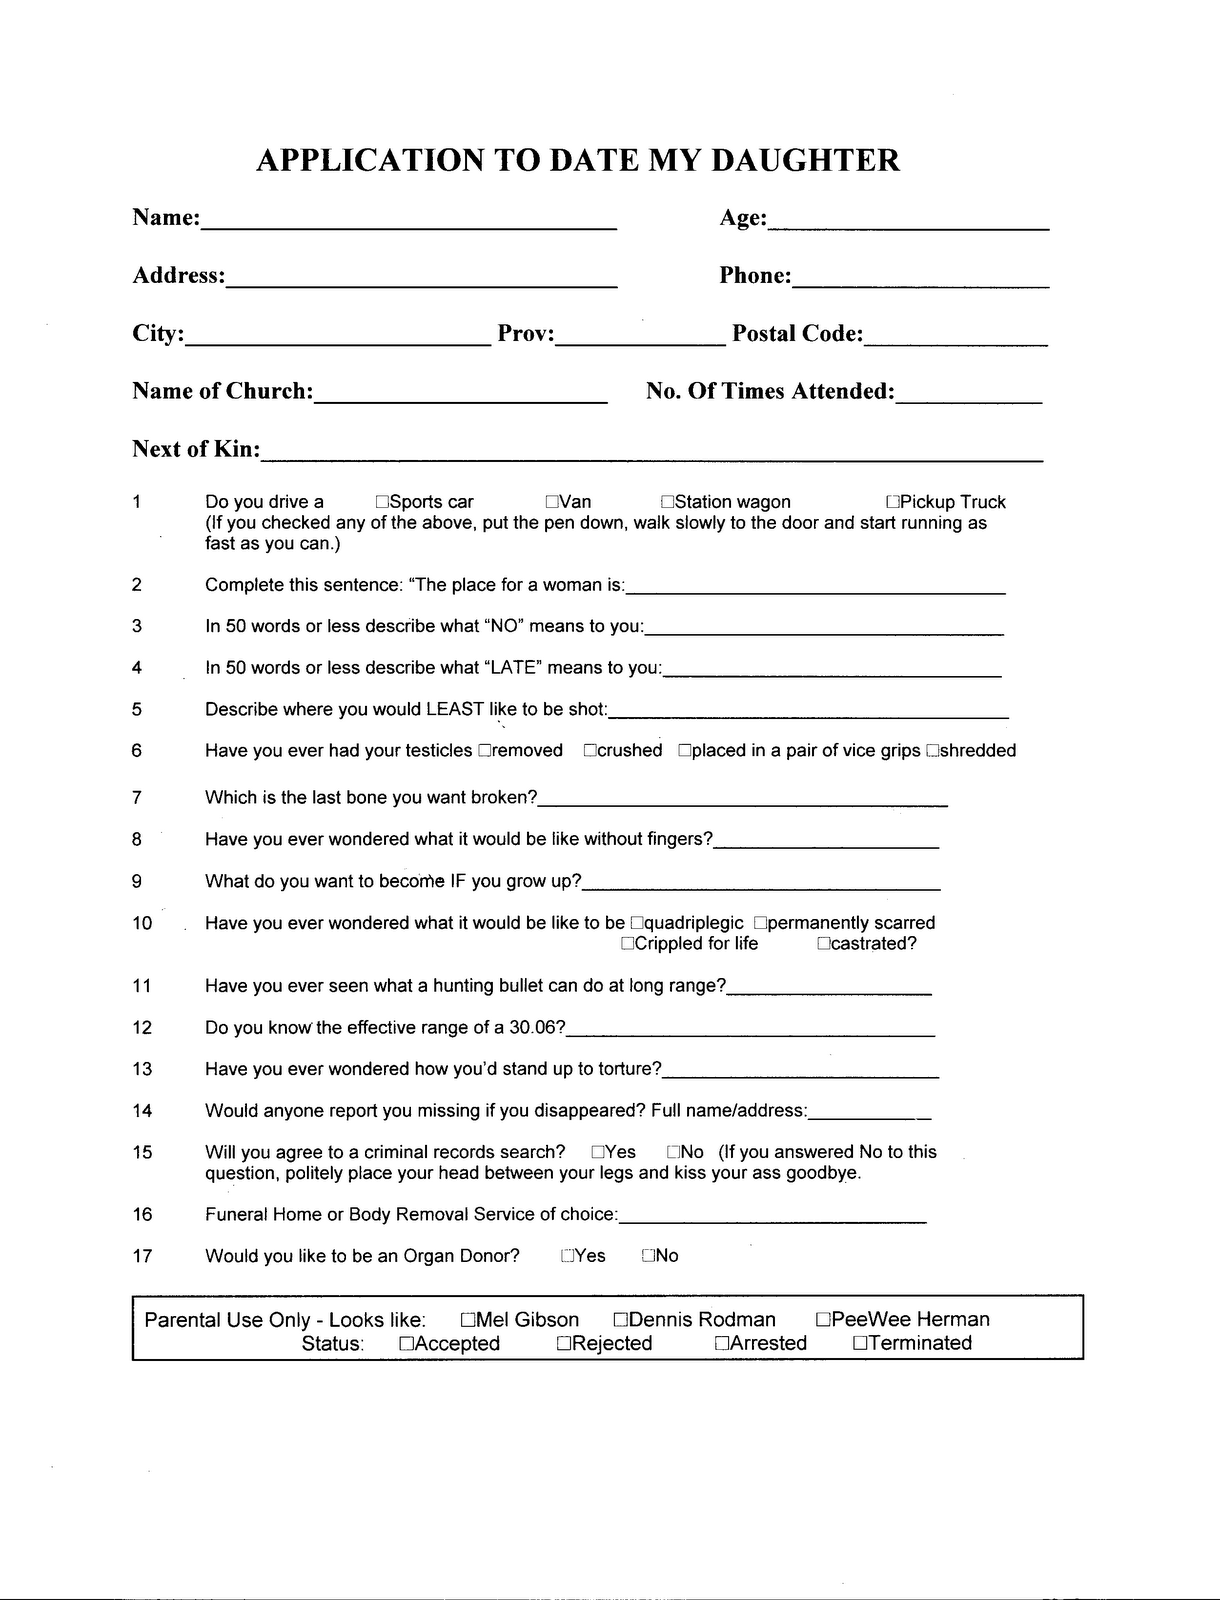 dating in the dark application form